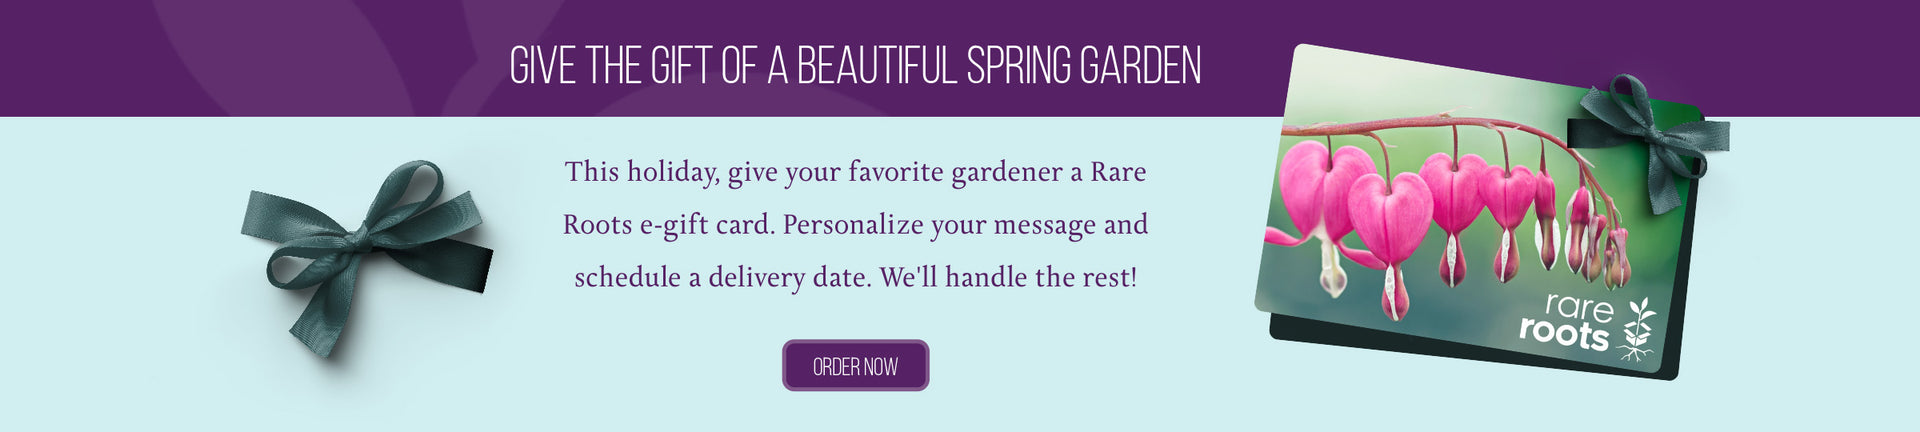 Give the gift of a beautiful spring garden. This holiday give your favorite gardener a Rare Roots electronic gift card. Personalize your message and schedule a delivery date. We'll handle the rest.